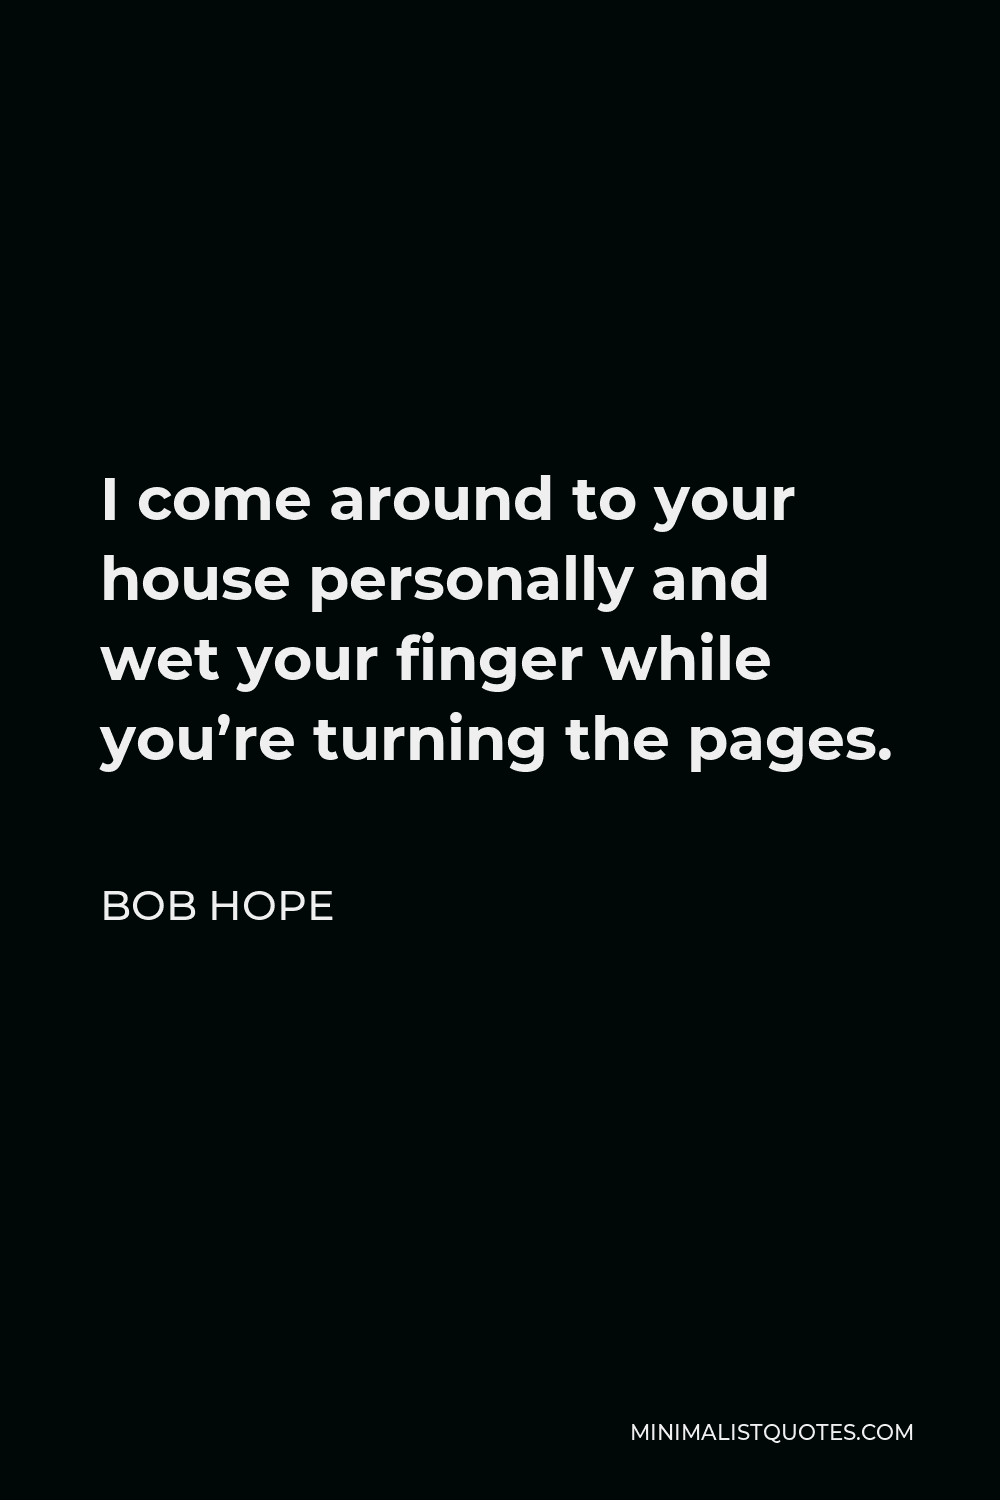 Bob Hope Quote - I come around to your house personally and wet your finger while you’re turning the pages.